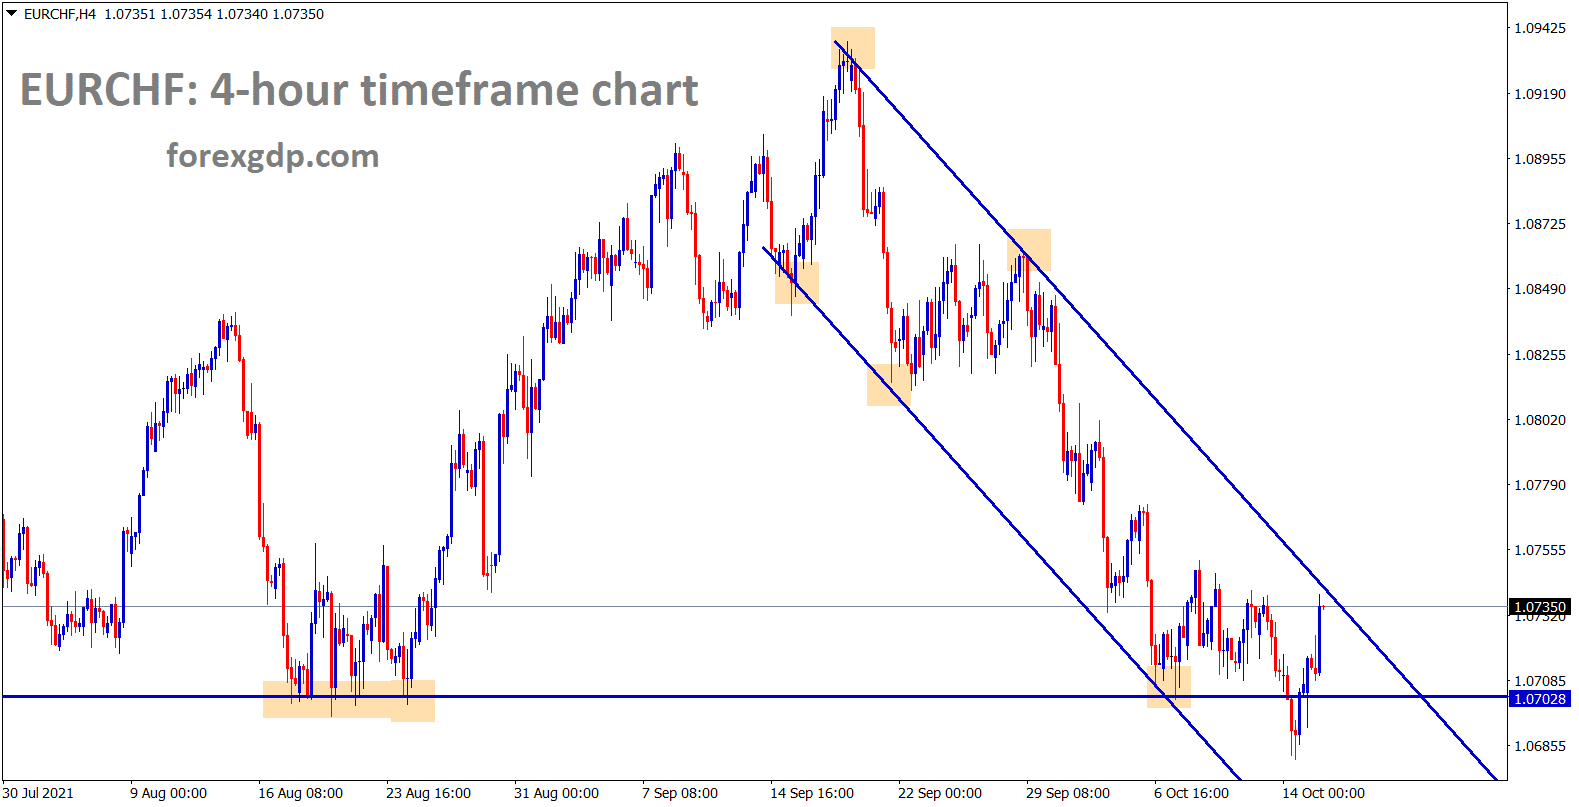 EURCHF is still moving in a descending channel range and its consolidating at the horizontal support area